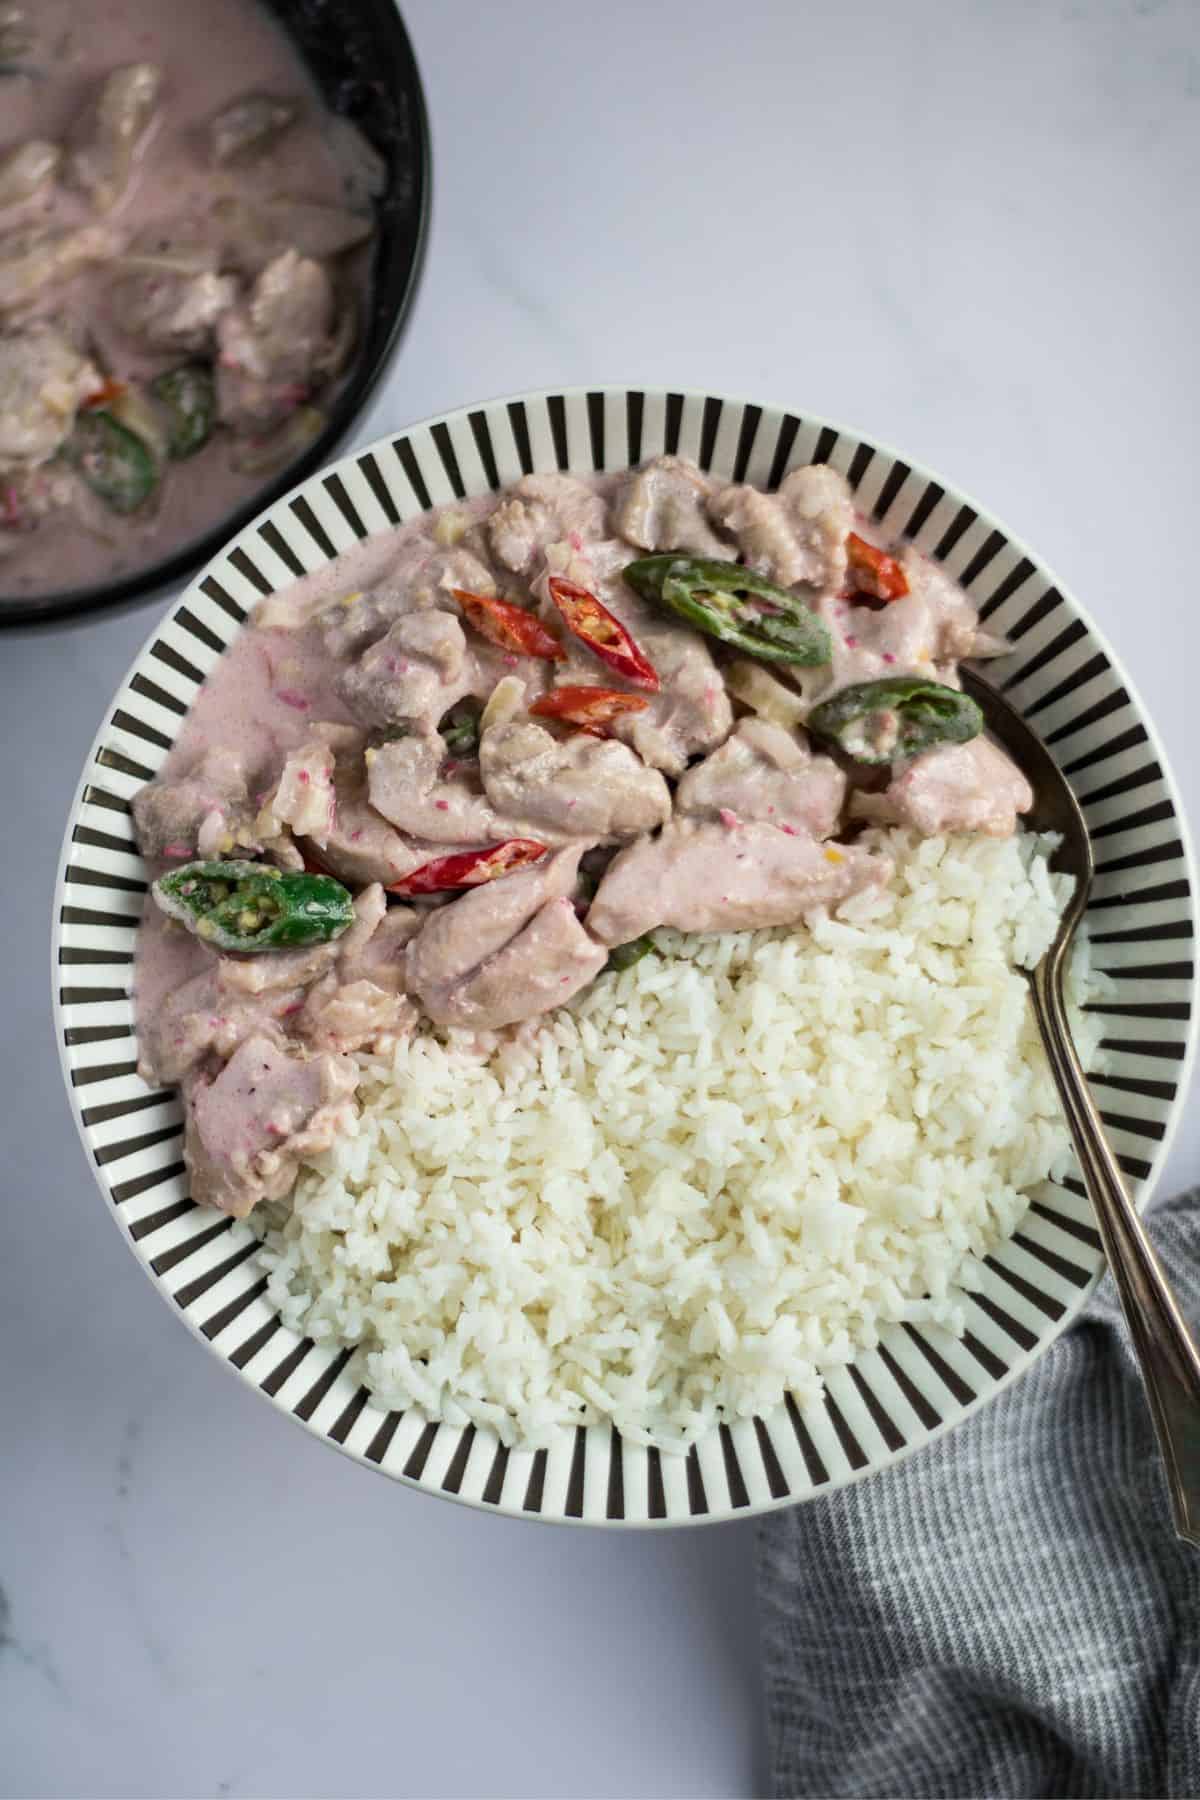 Chicken bicol express in a plate with rice.